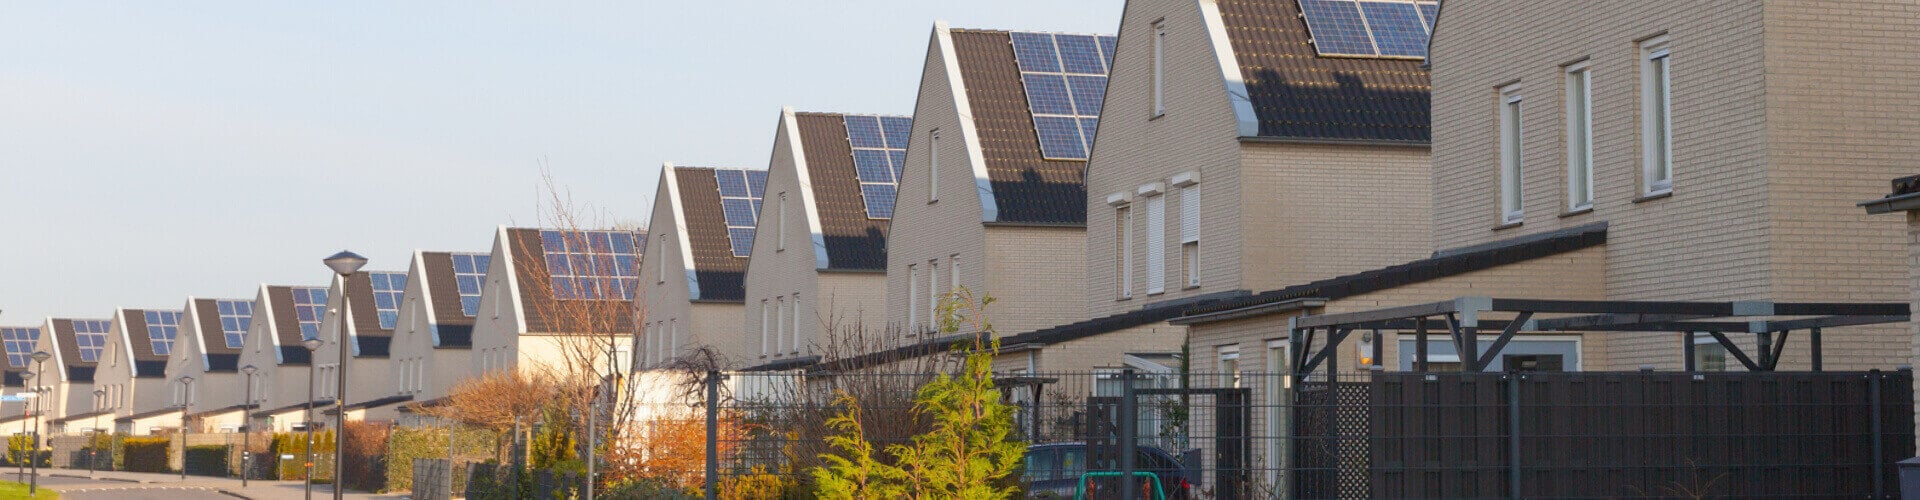 A housing estate of identical beige houses with solar panels on the roofs